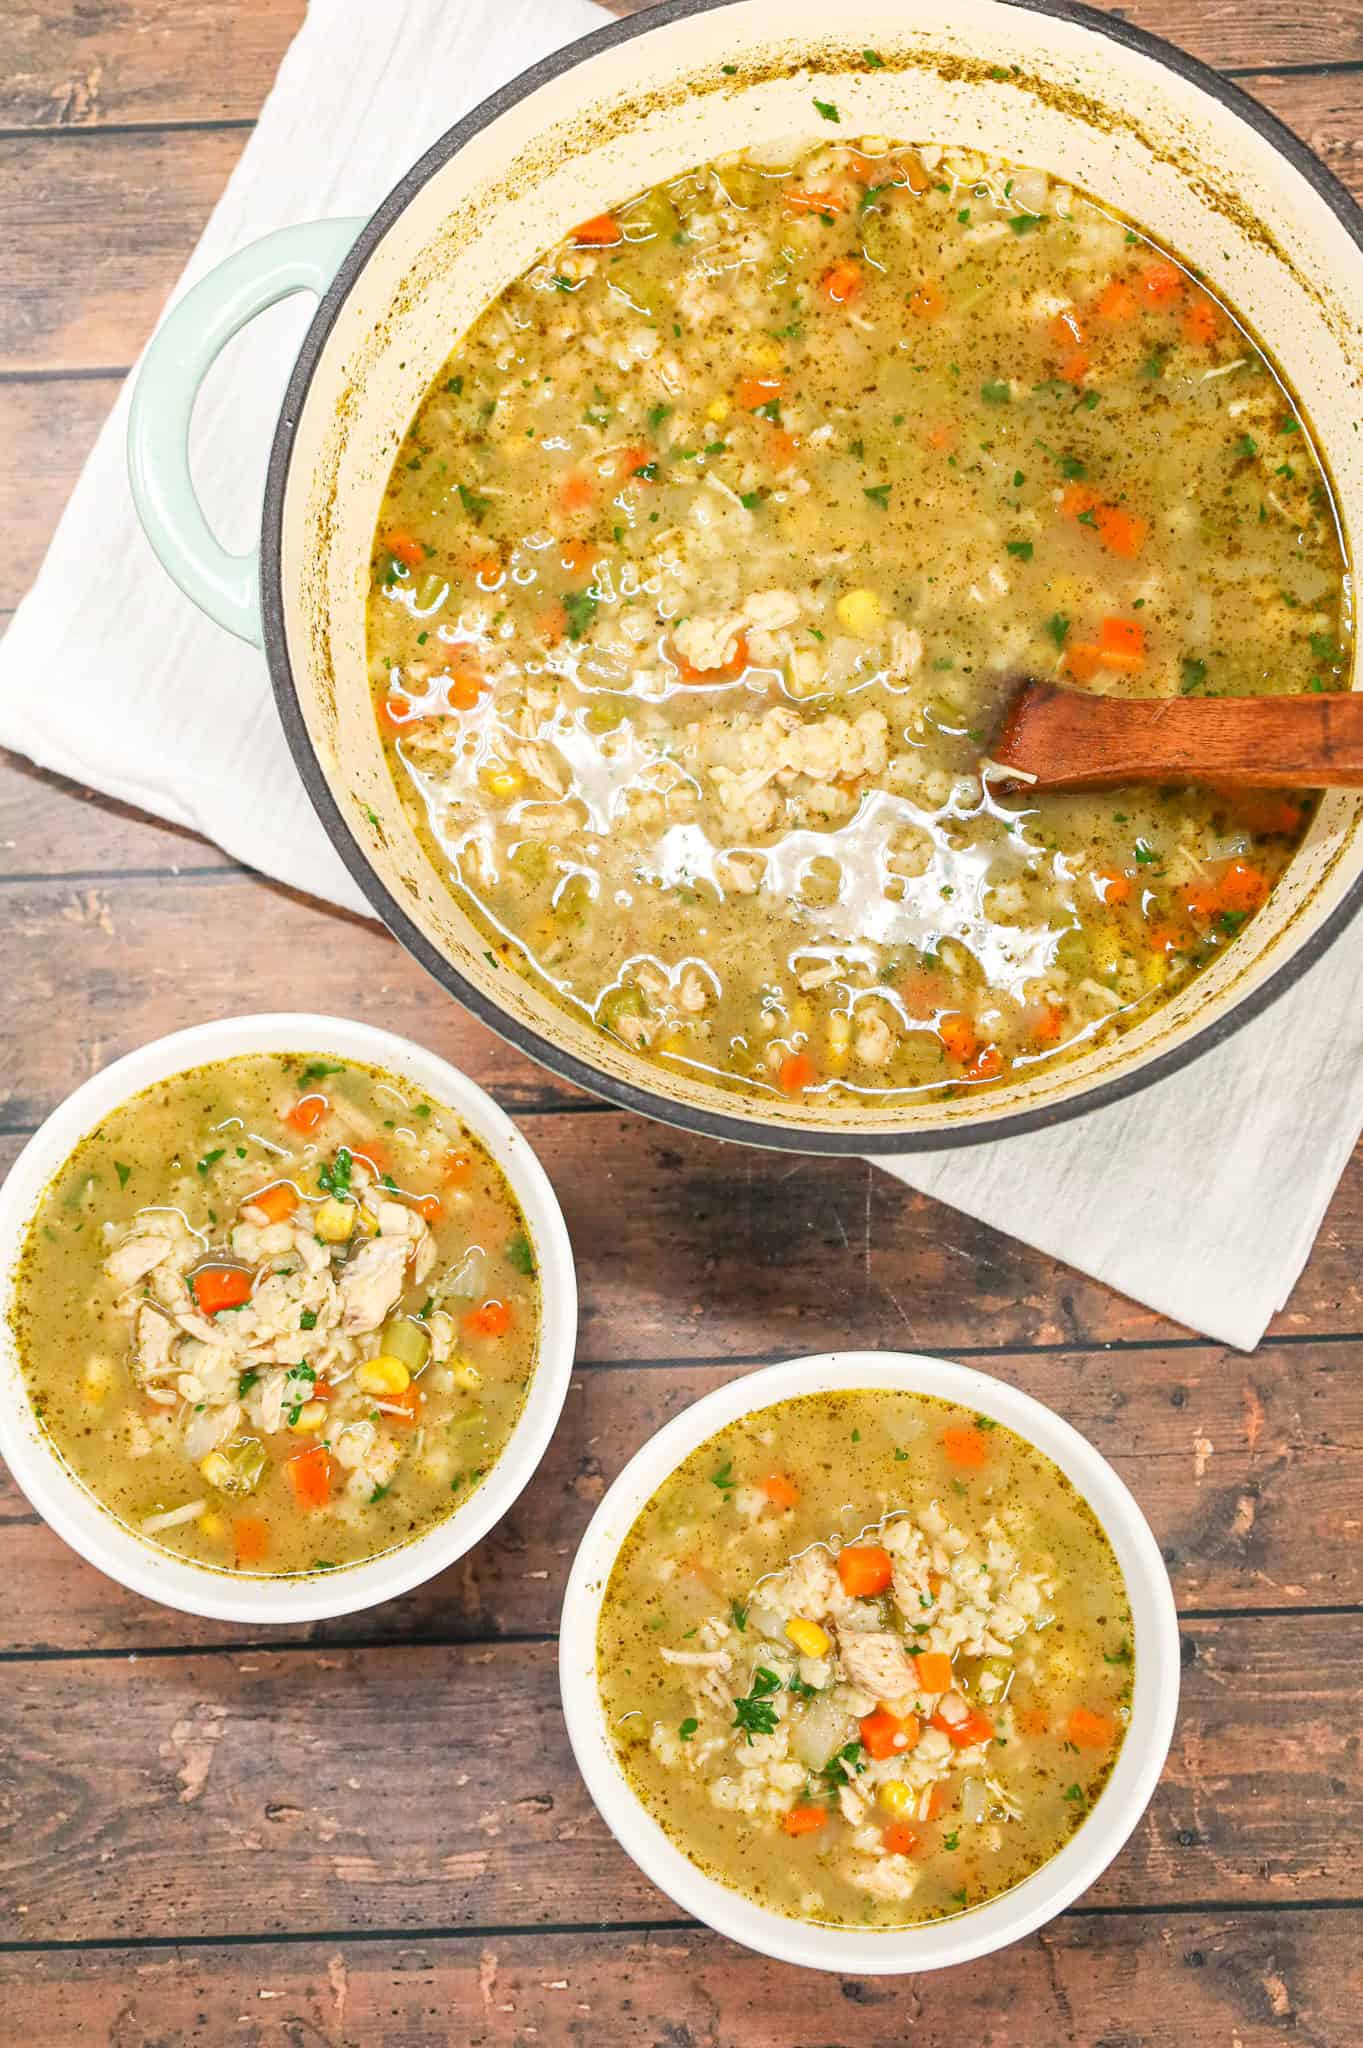 Chicken and Stars Soup is a hearty soup recipe loaded with chunks of chicken, onions, carrots, celery, corn and star shaped pasta.